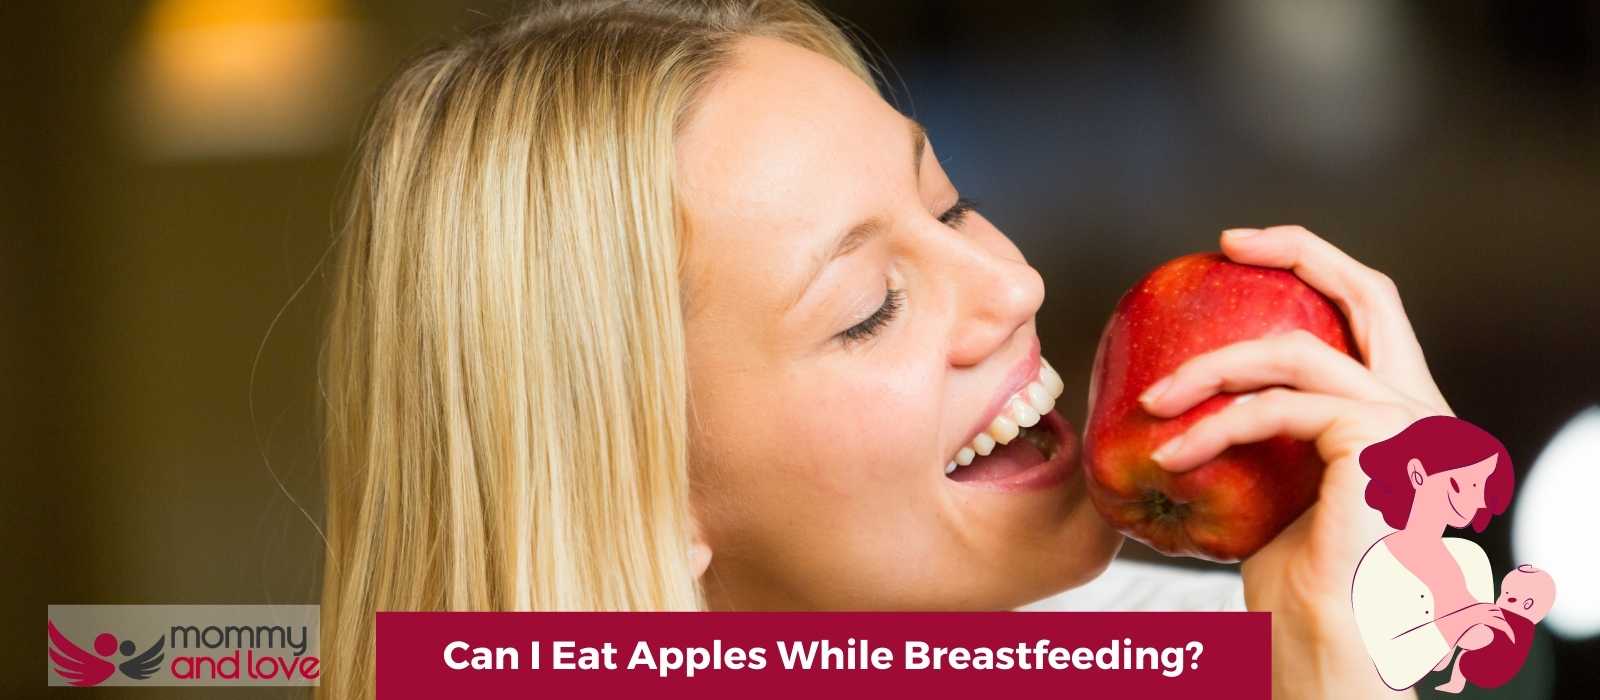 Can I Eat Apples While Breastfeeding?